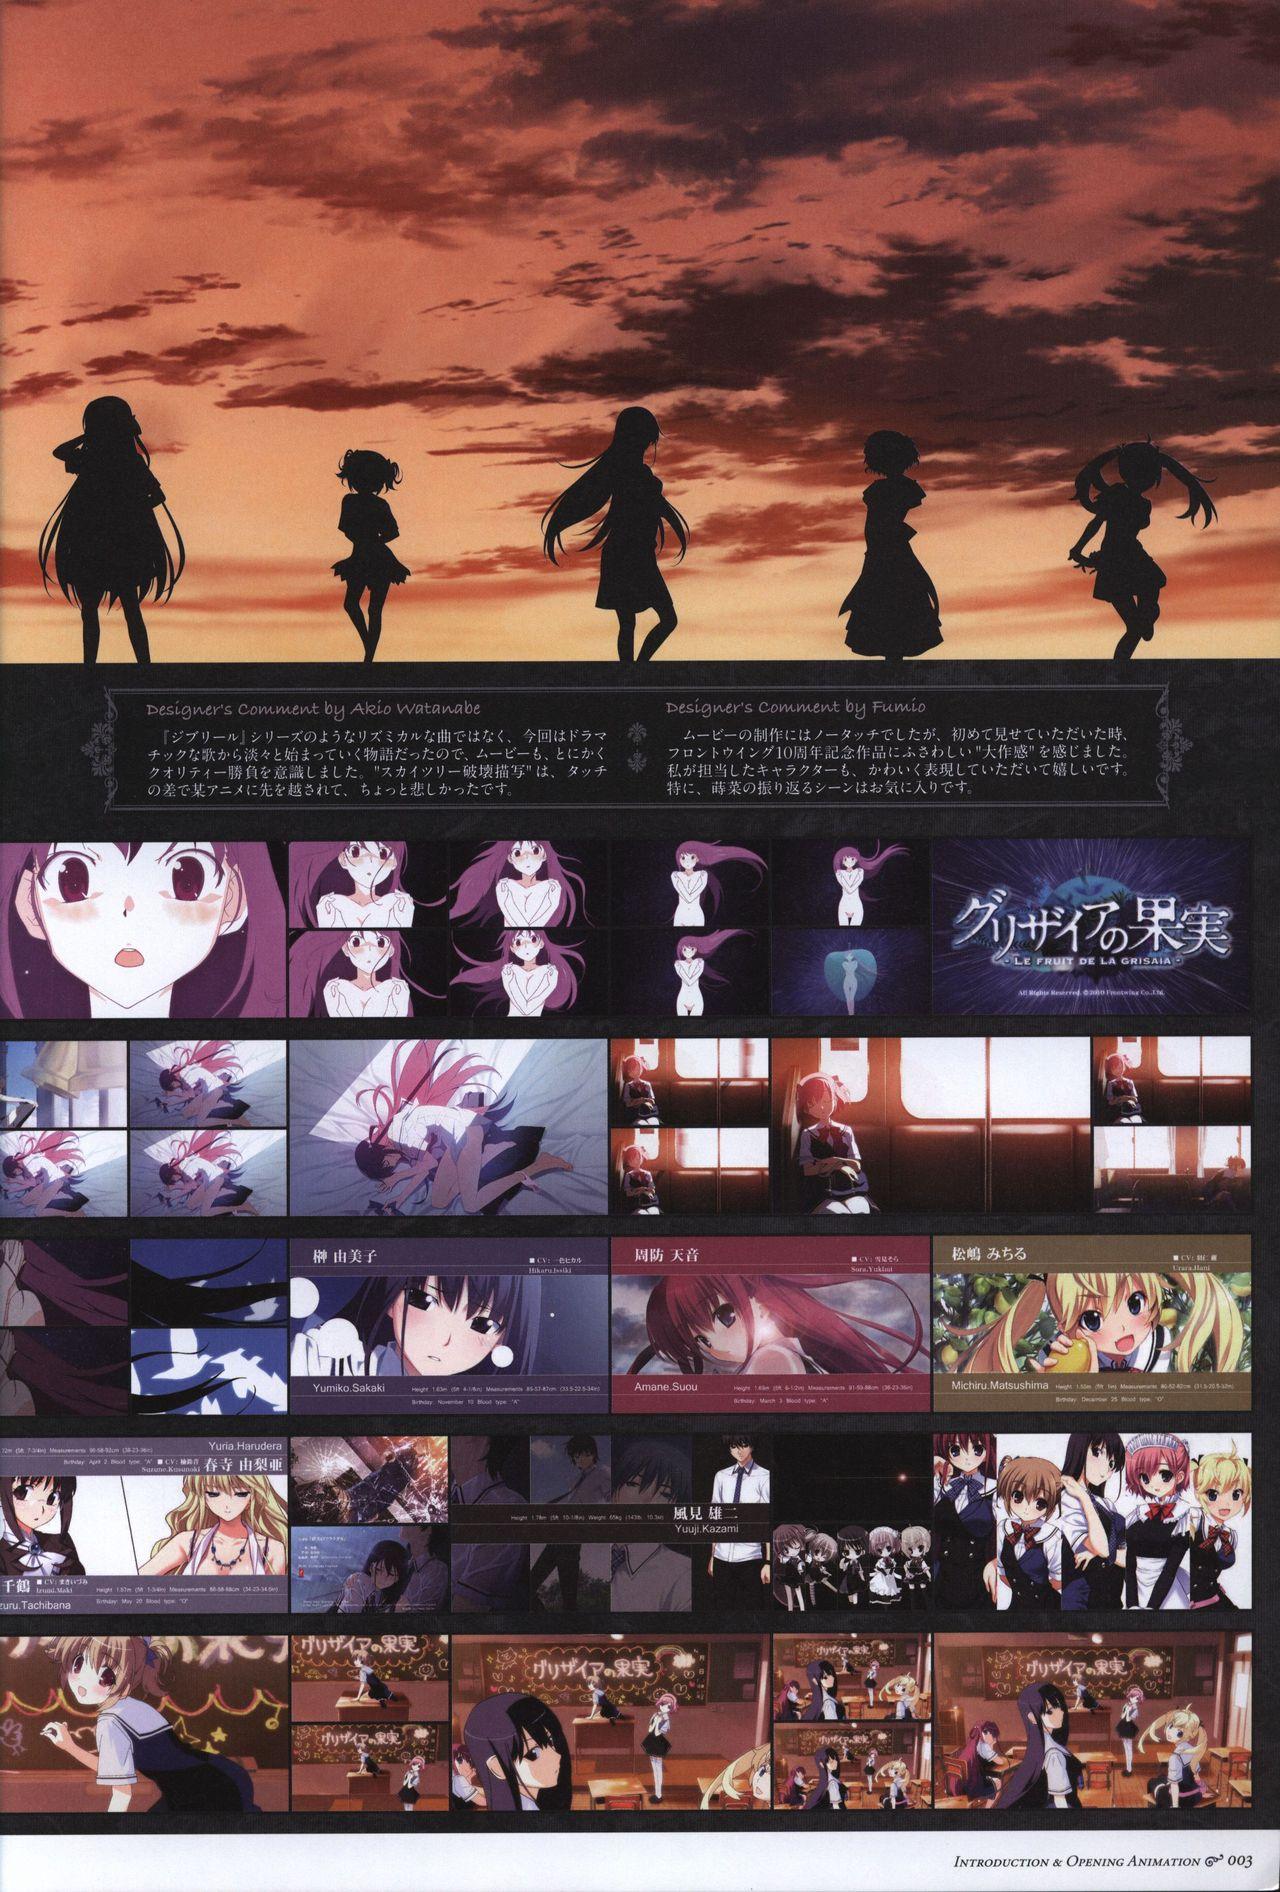 The Fruit of Grisaia Visual FanBook 3